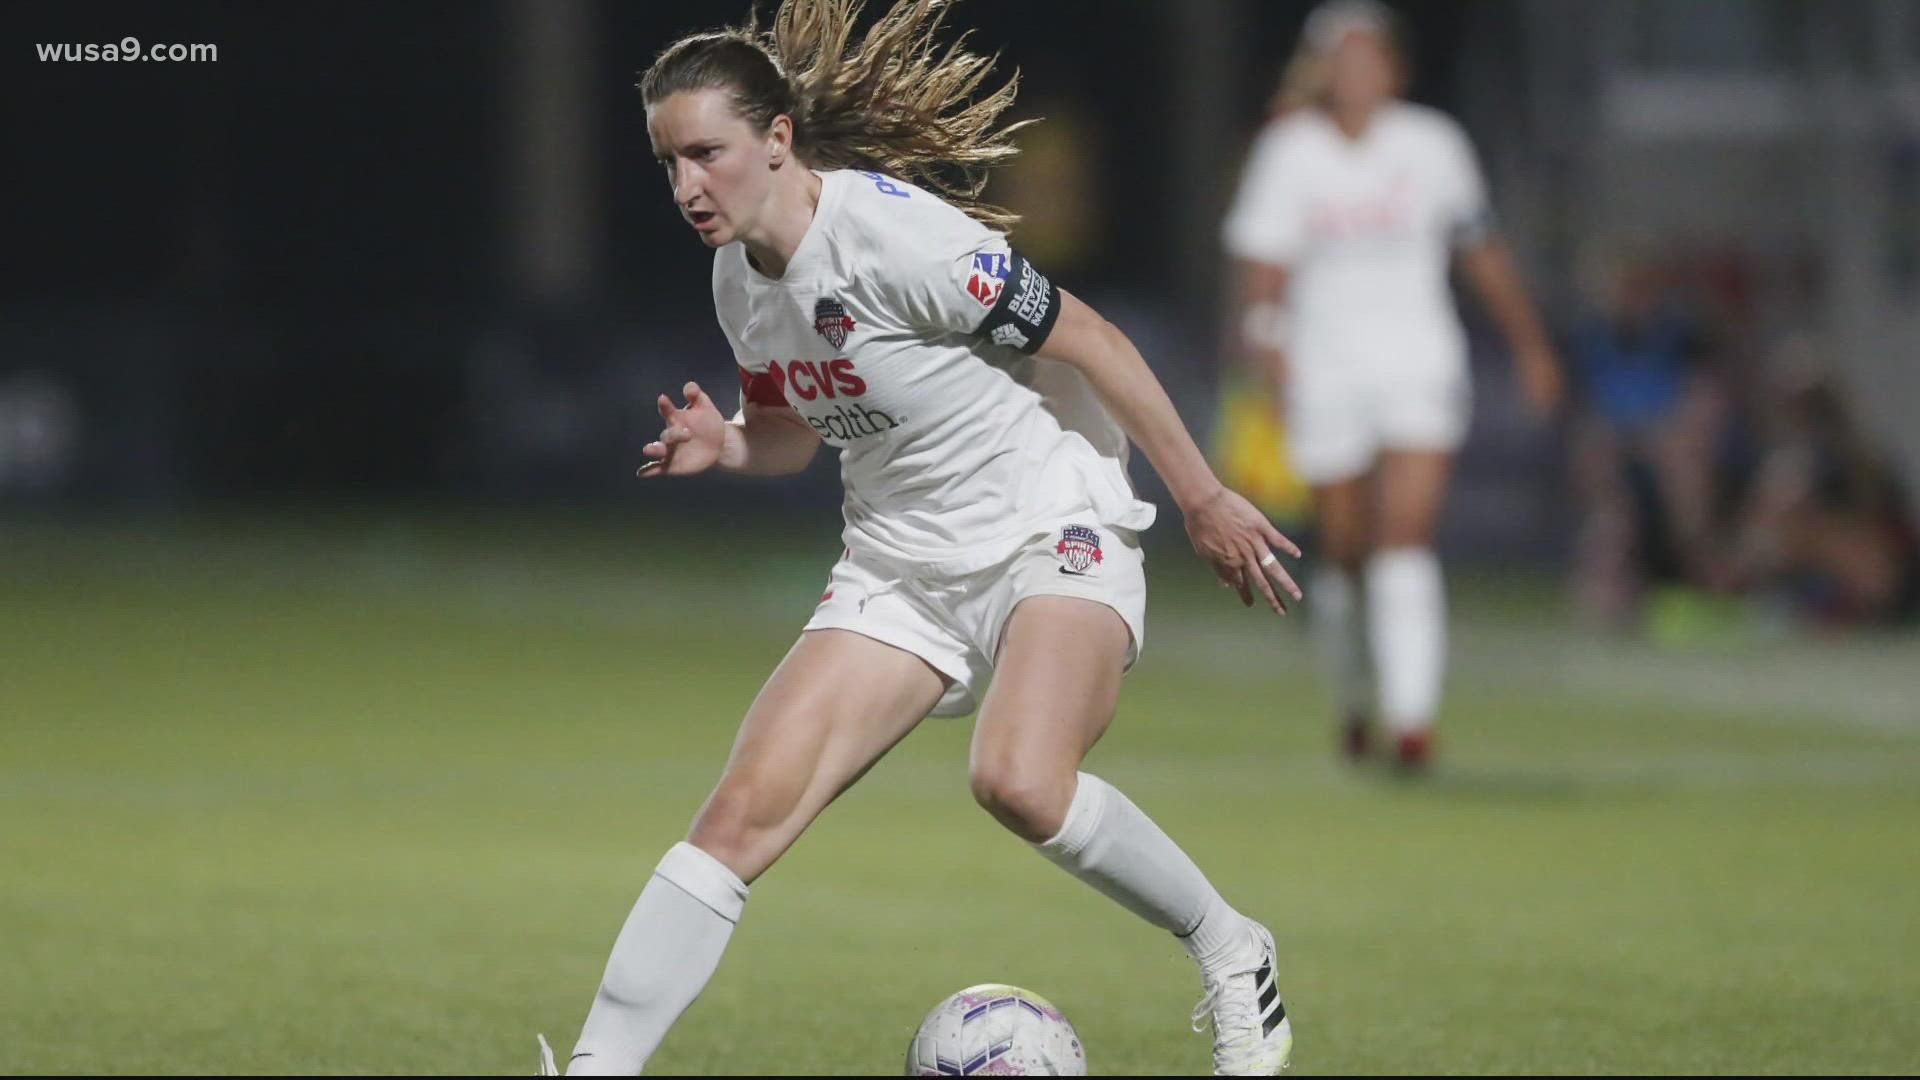 The Washington Spirit will face the Chicago Red Stars in the championship game and for three of the members, winning a title for the DMV hits home differently.